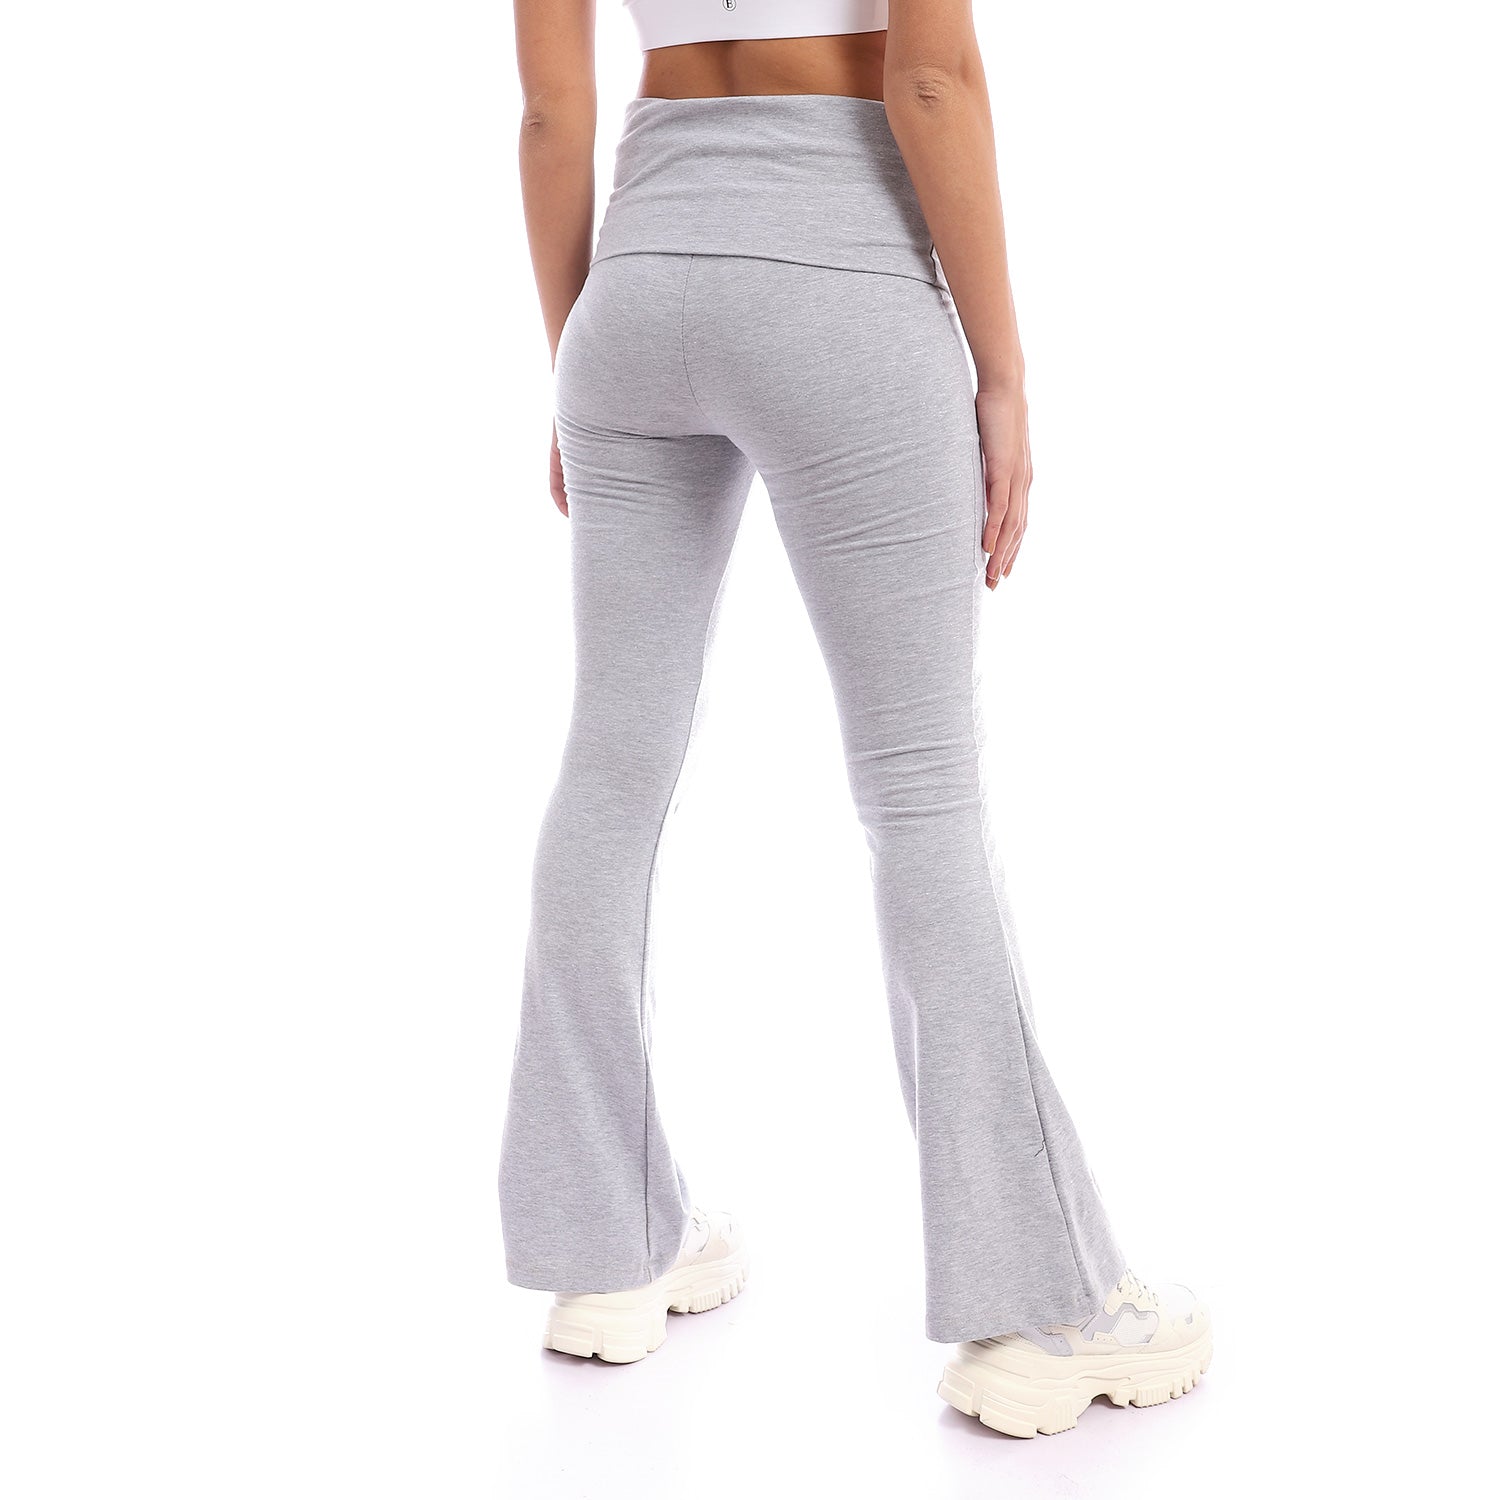 Gilbins Womens Fold Over Yoga Pants Waistband Stretchy Cotton Blend with A  Wide Flare Leg Yoga Workout Pants Gray 